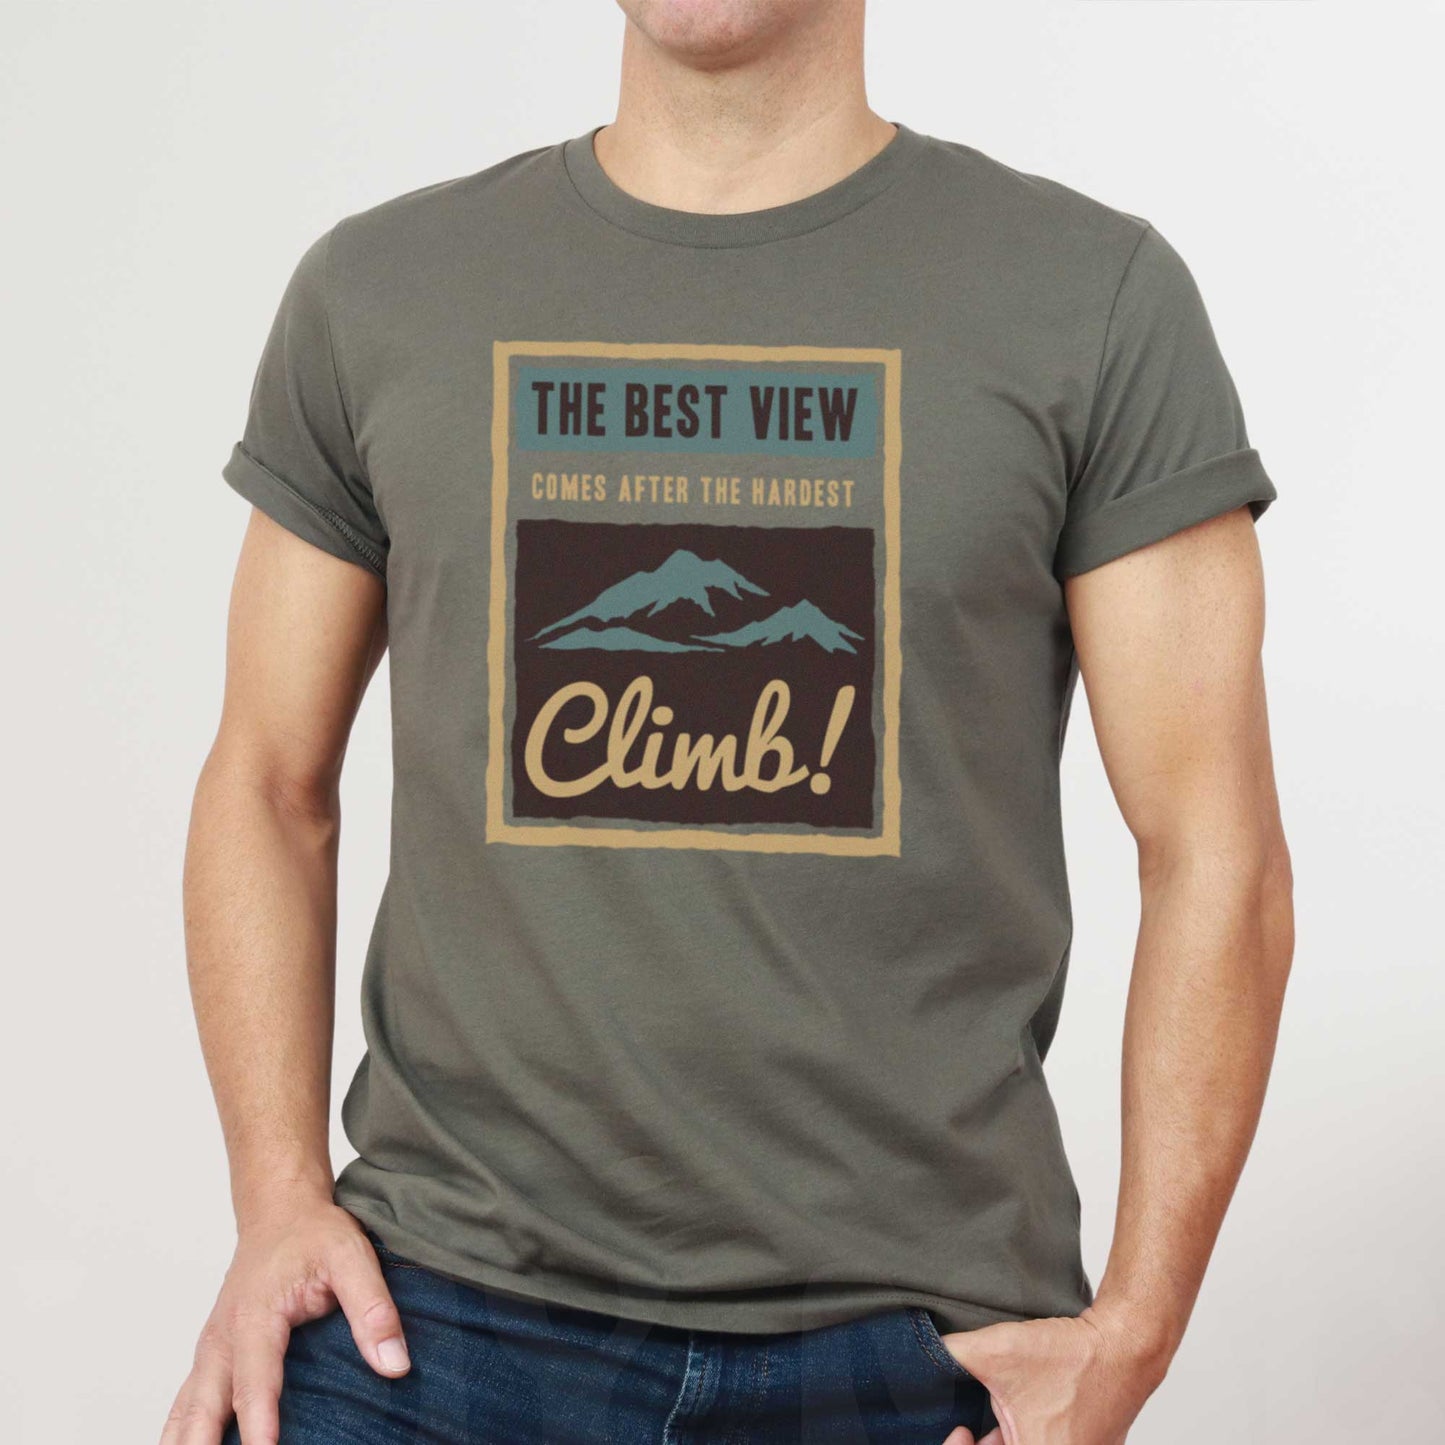 A man wearing an army green Bella Canvas t-shirt that features mountains and the words the best view comes after the hardest climb.